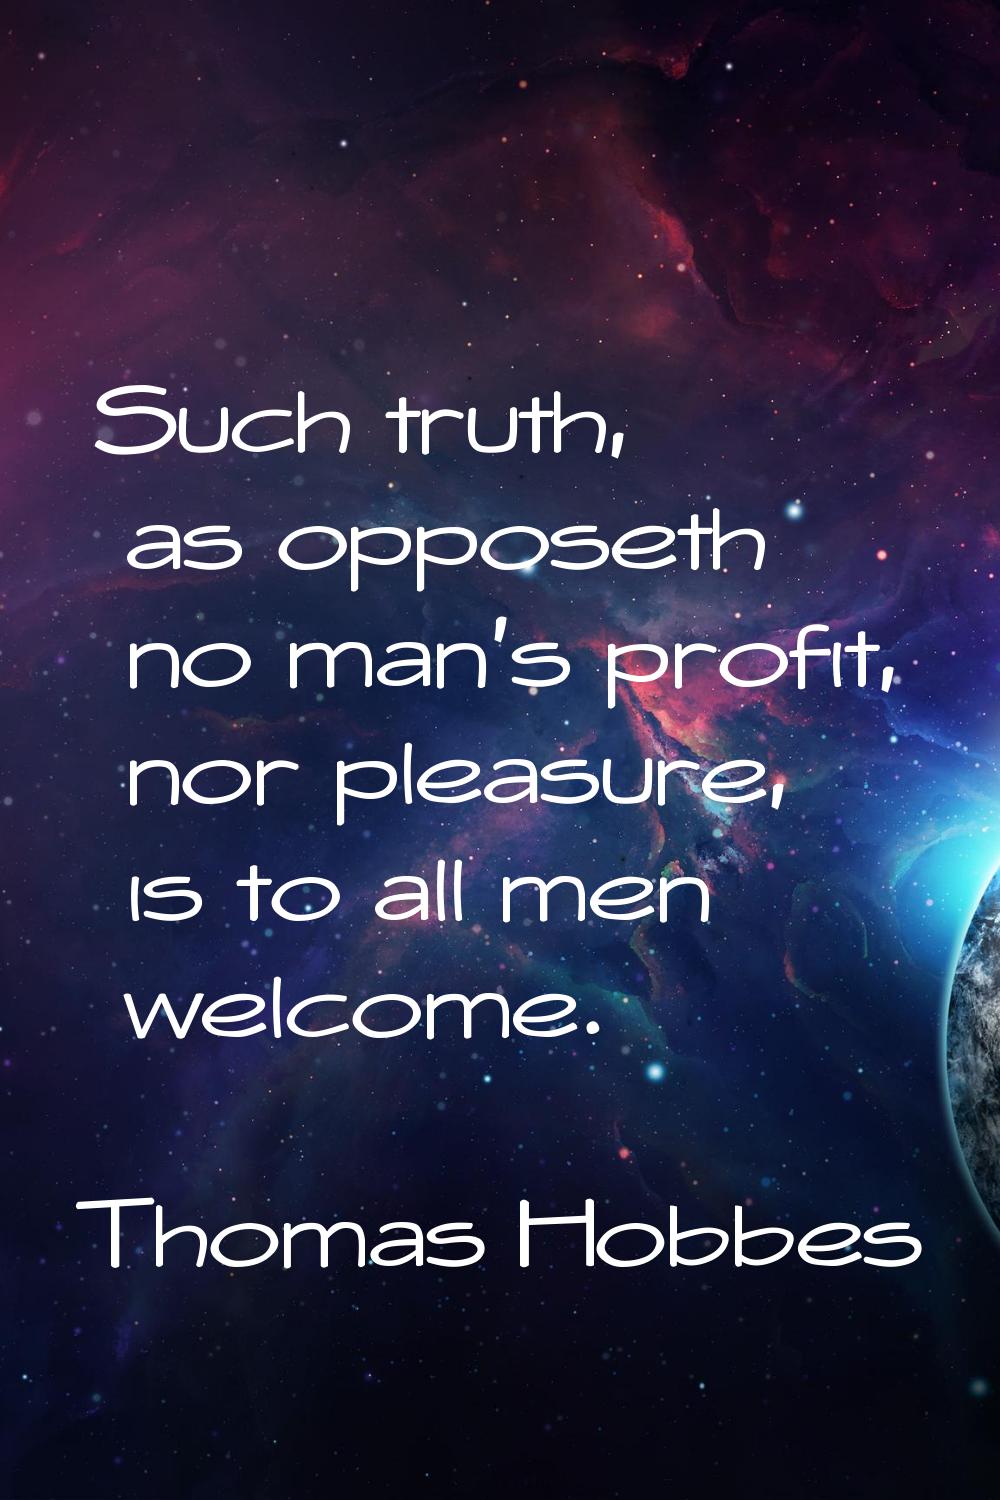 Such truth, as opposeth no man's profit, nor pleasure, is to all men welcome.